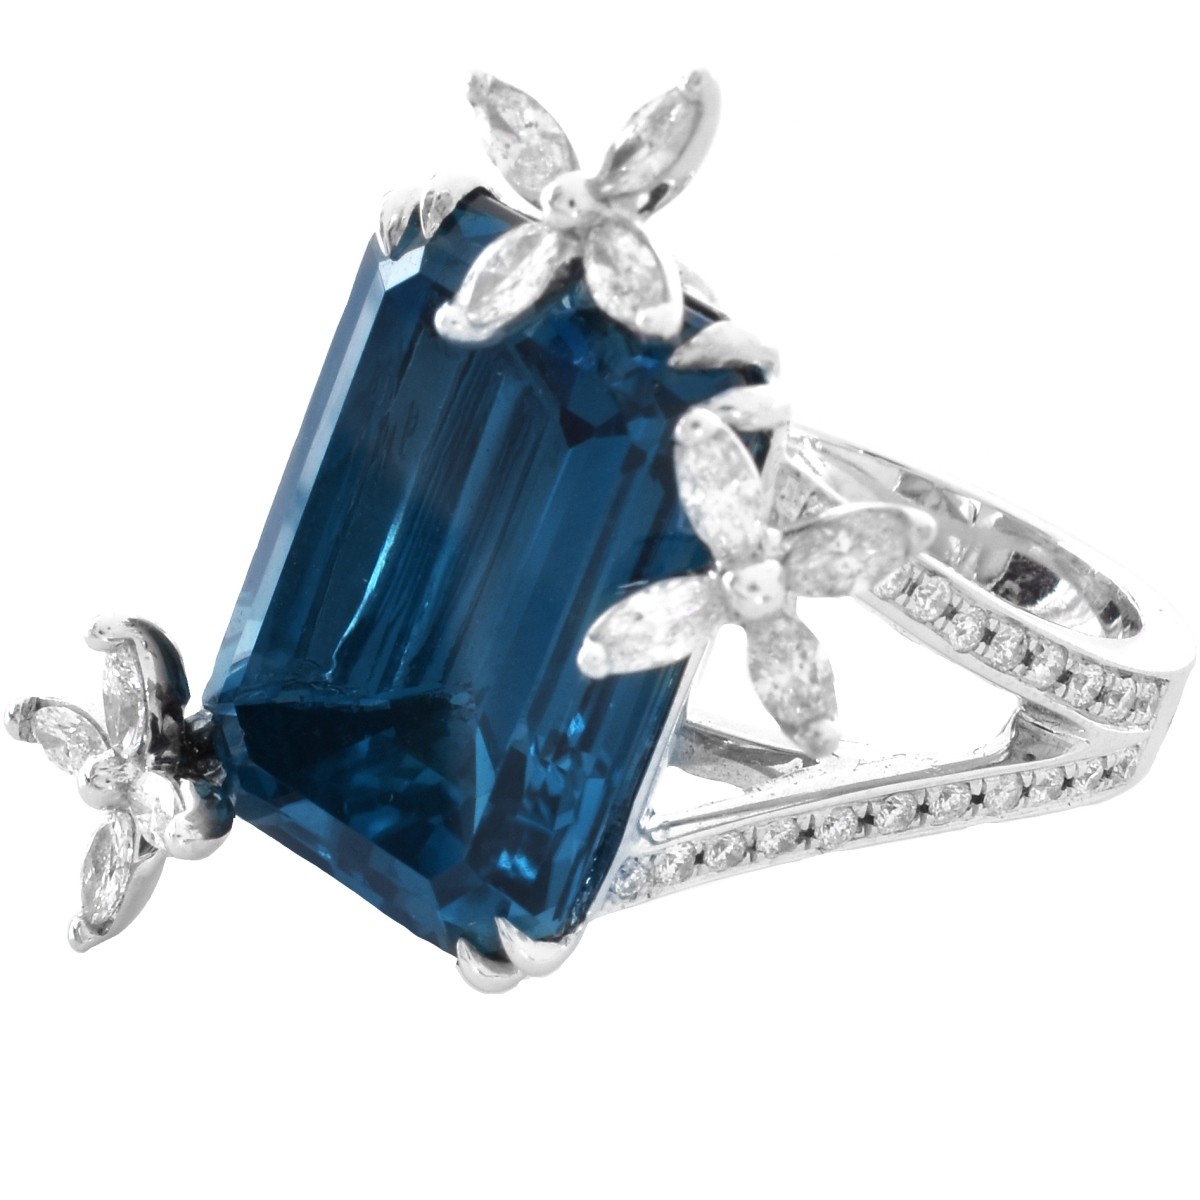 London Topaz, Diamond and 18K Gold Ring - Image 3 of 6